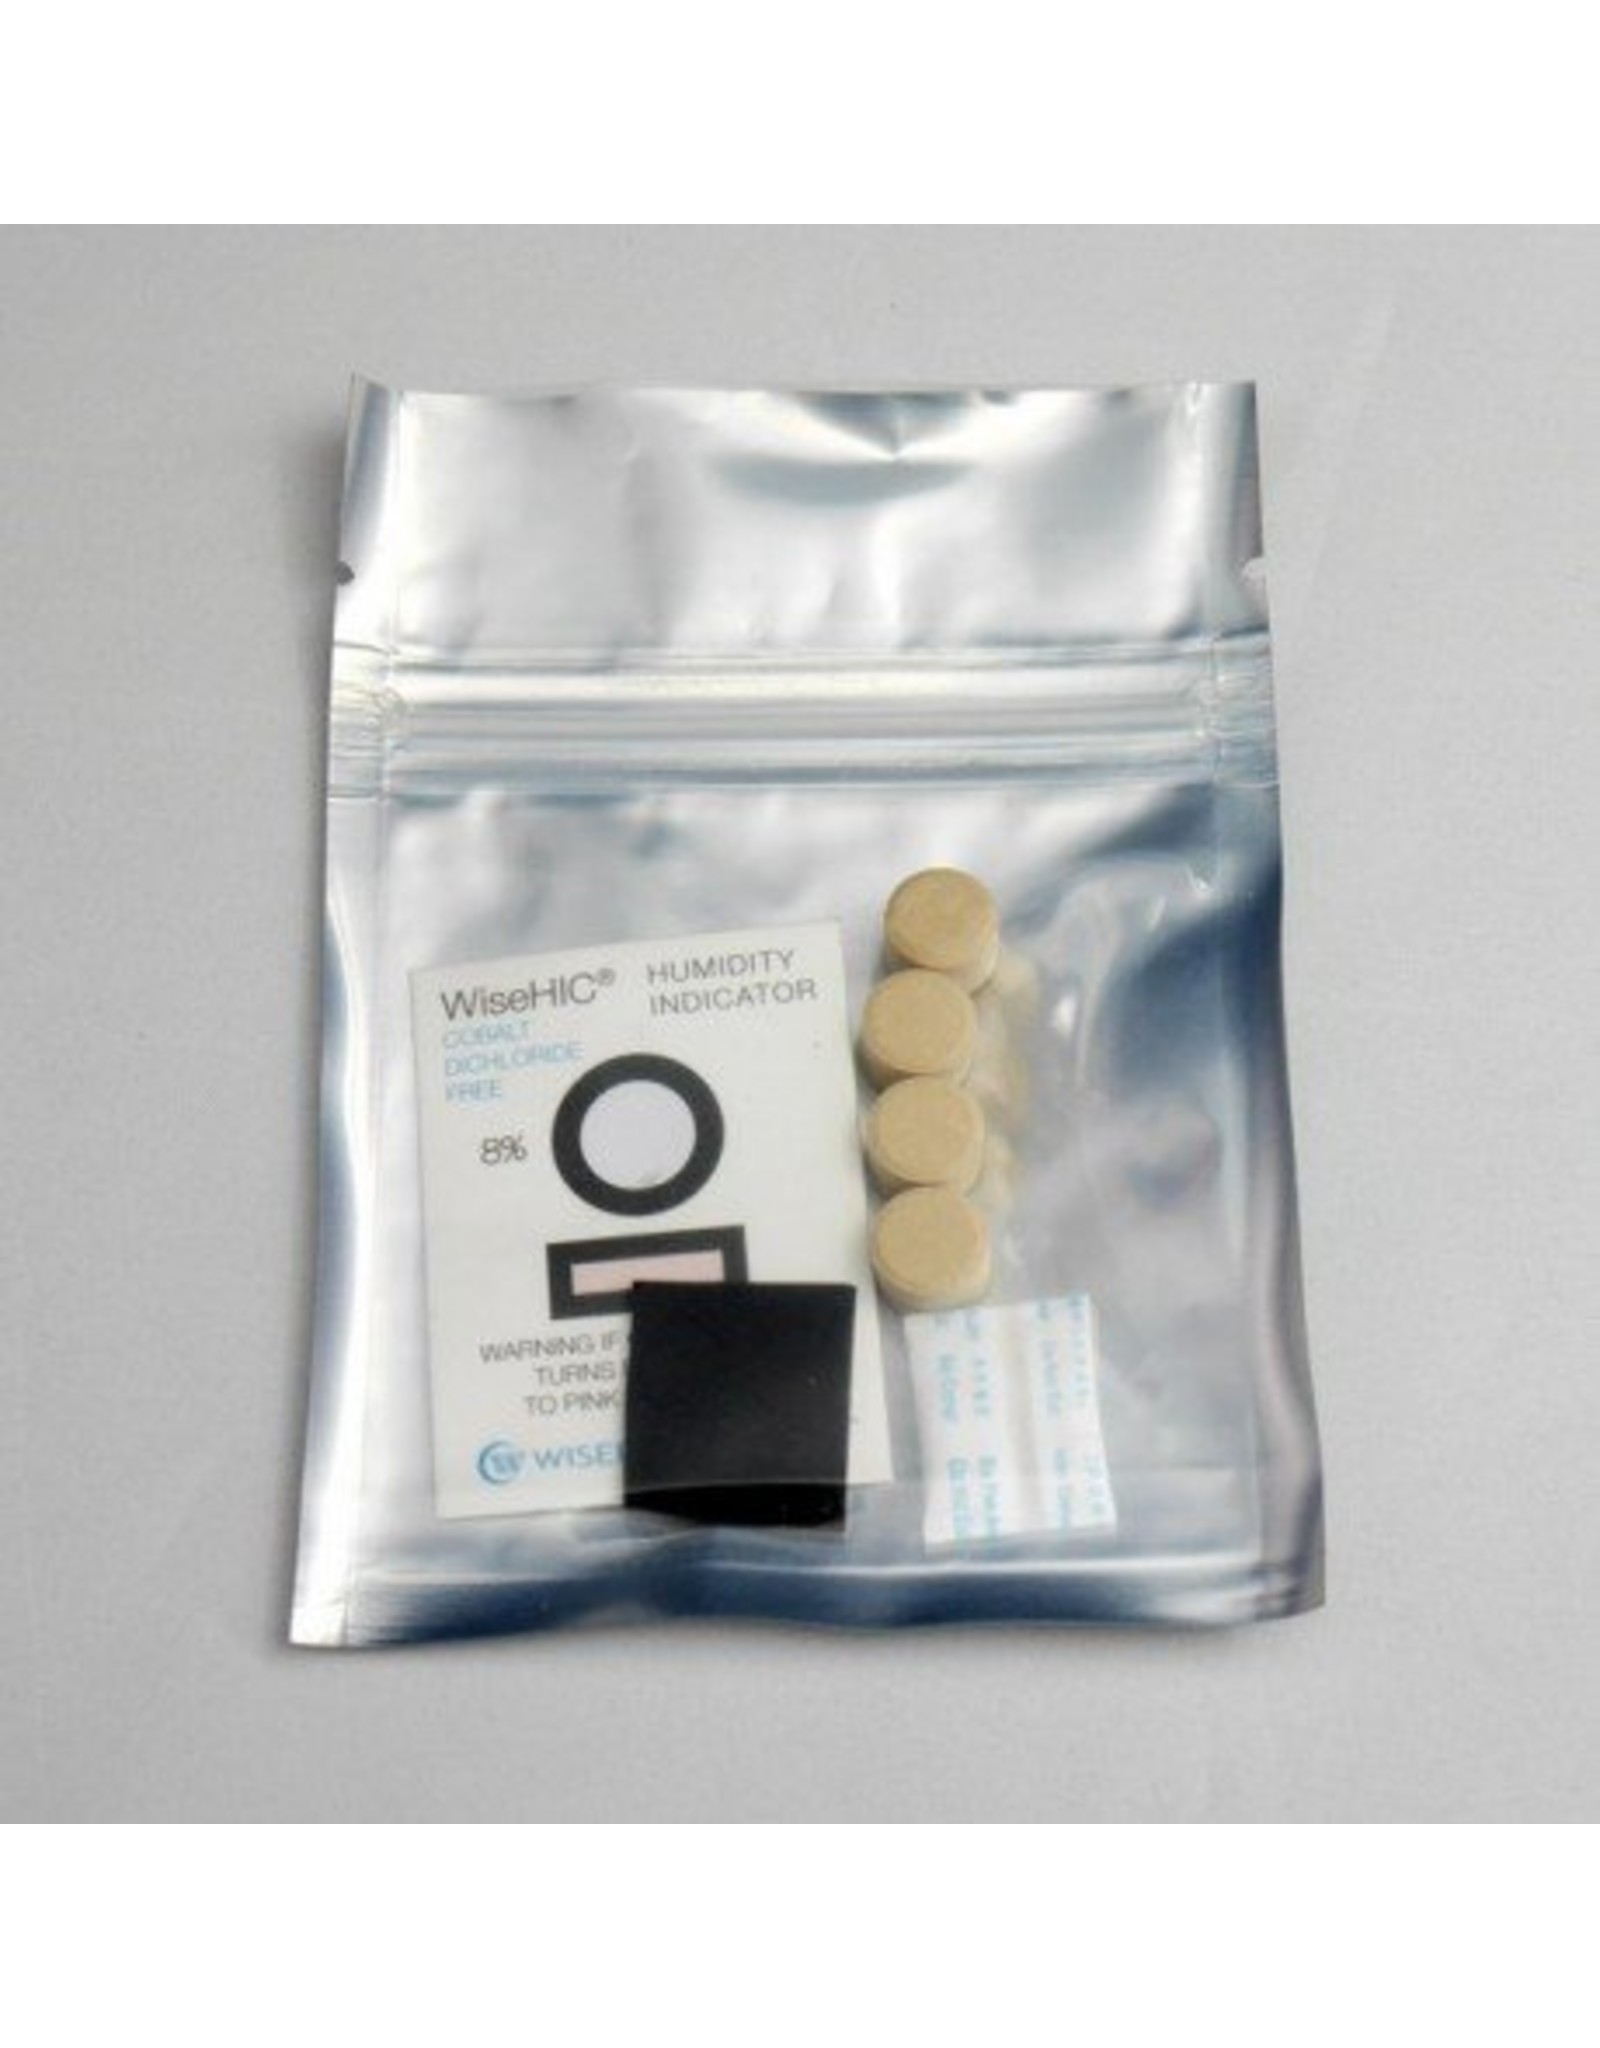 ZWO ZWO Desiccant Tablets for ASI Cooled Cameras